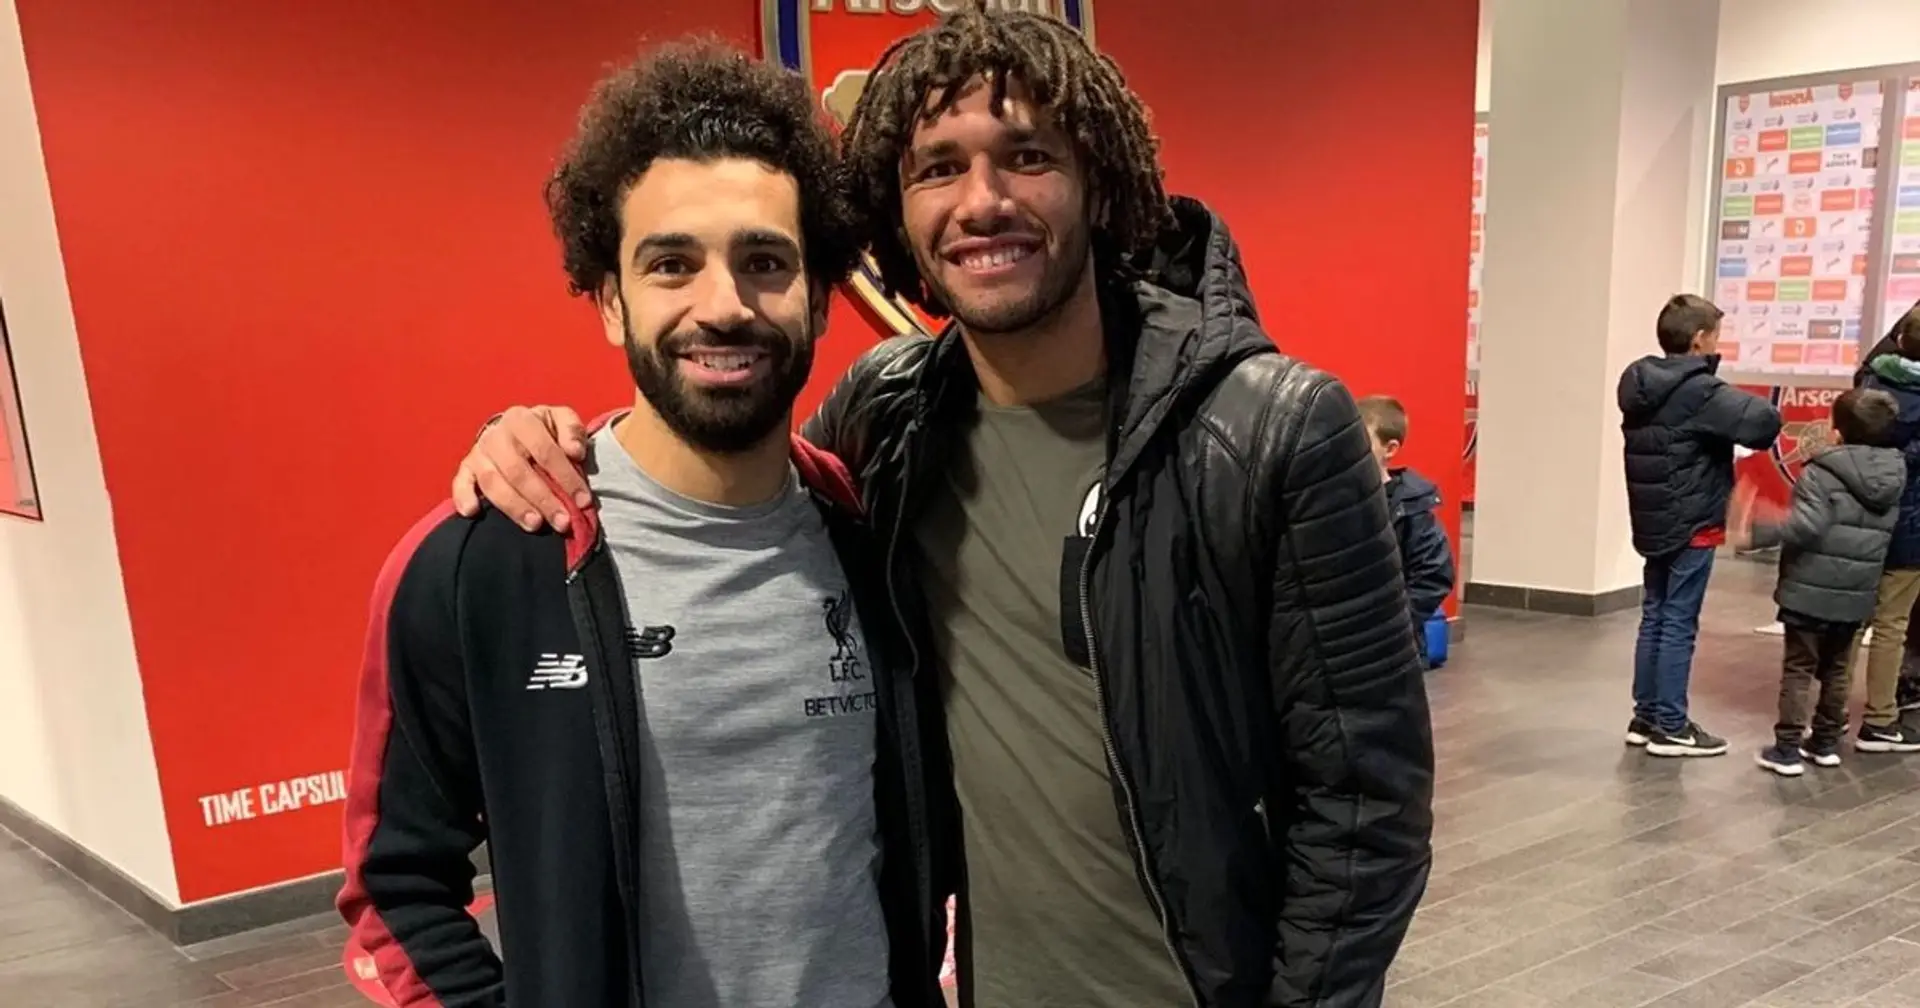 Elneny names Salah as greatest African footballer ahead of the likes of Eto’o, Drogba and Kanu